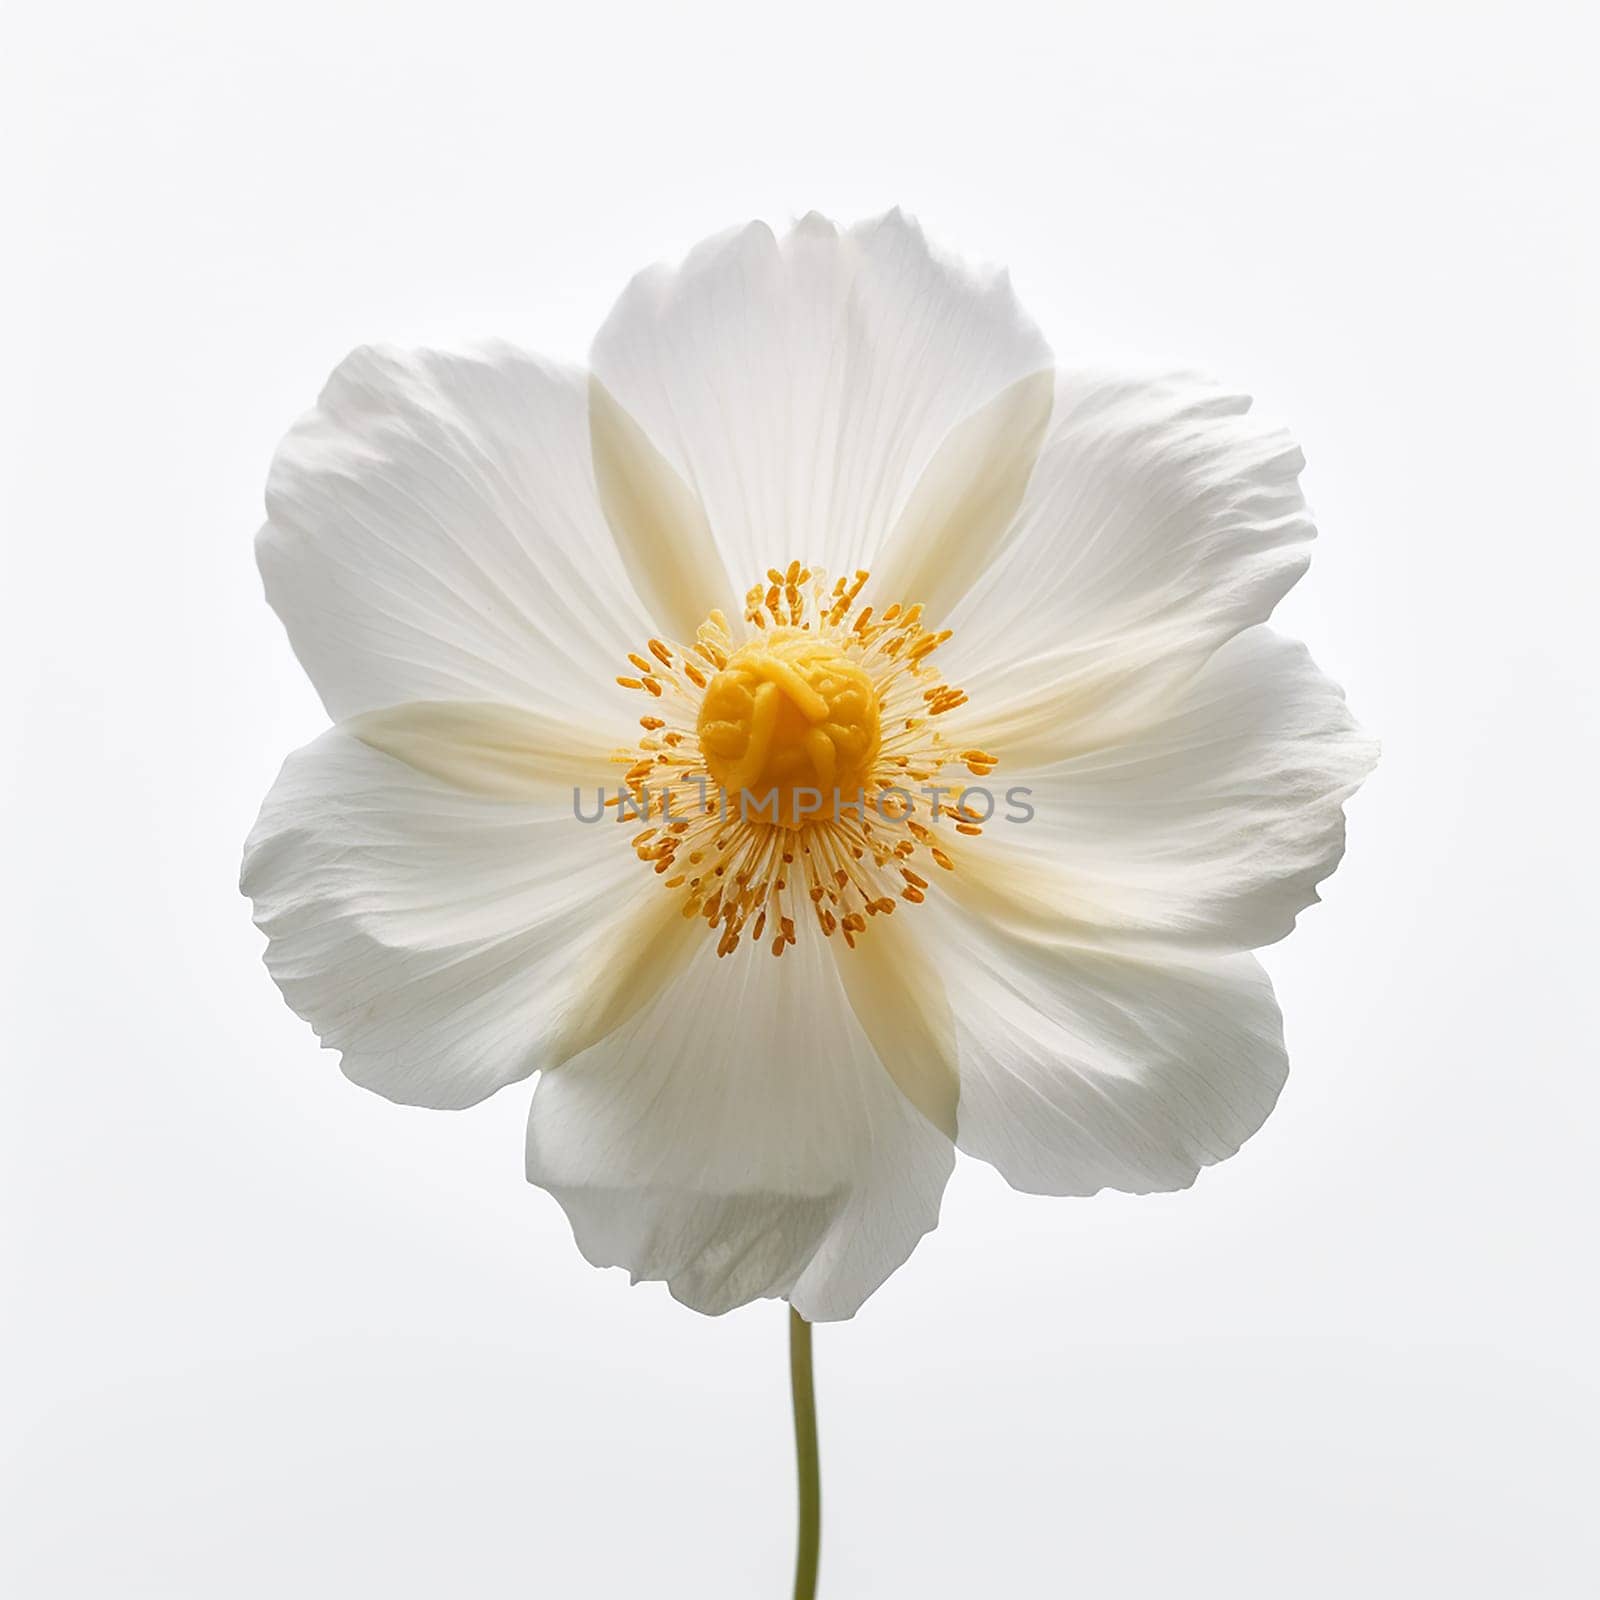 A single white flower with a yellow center against a plain background